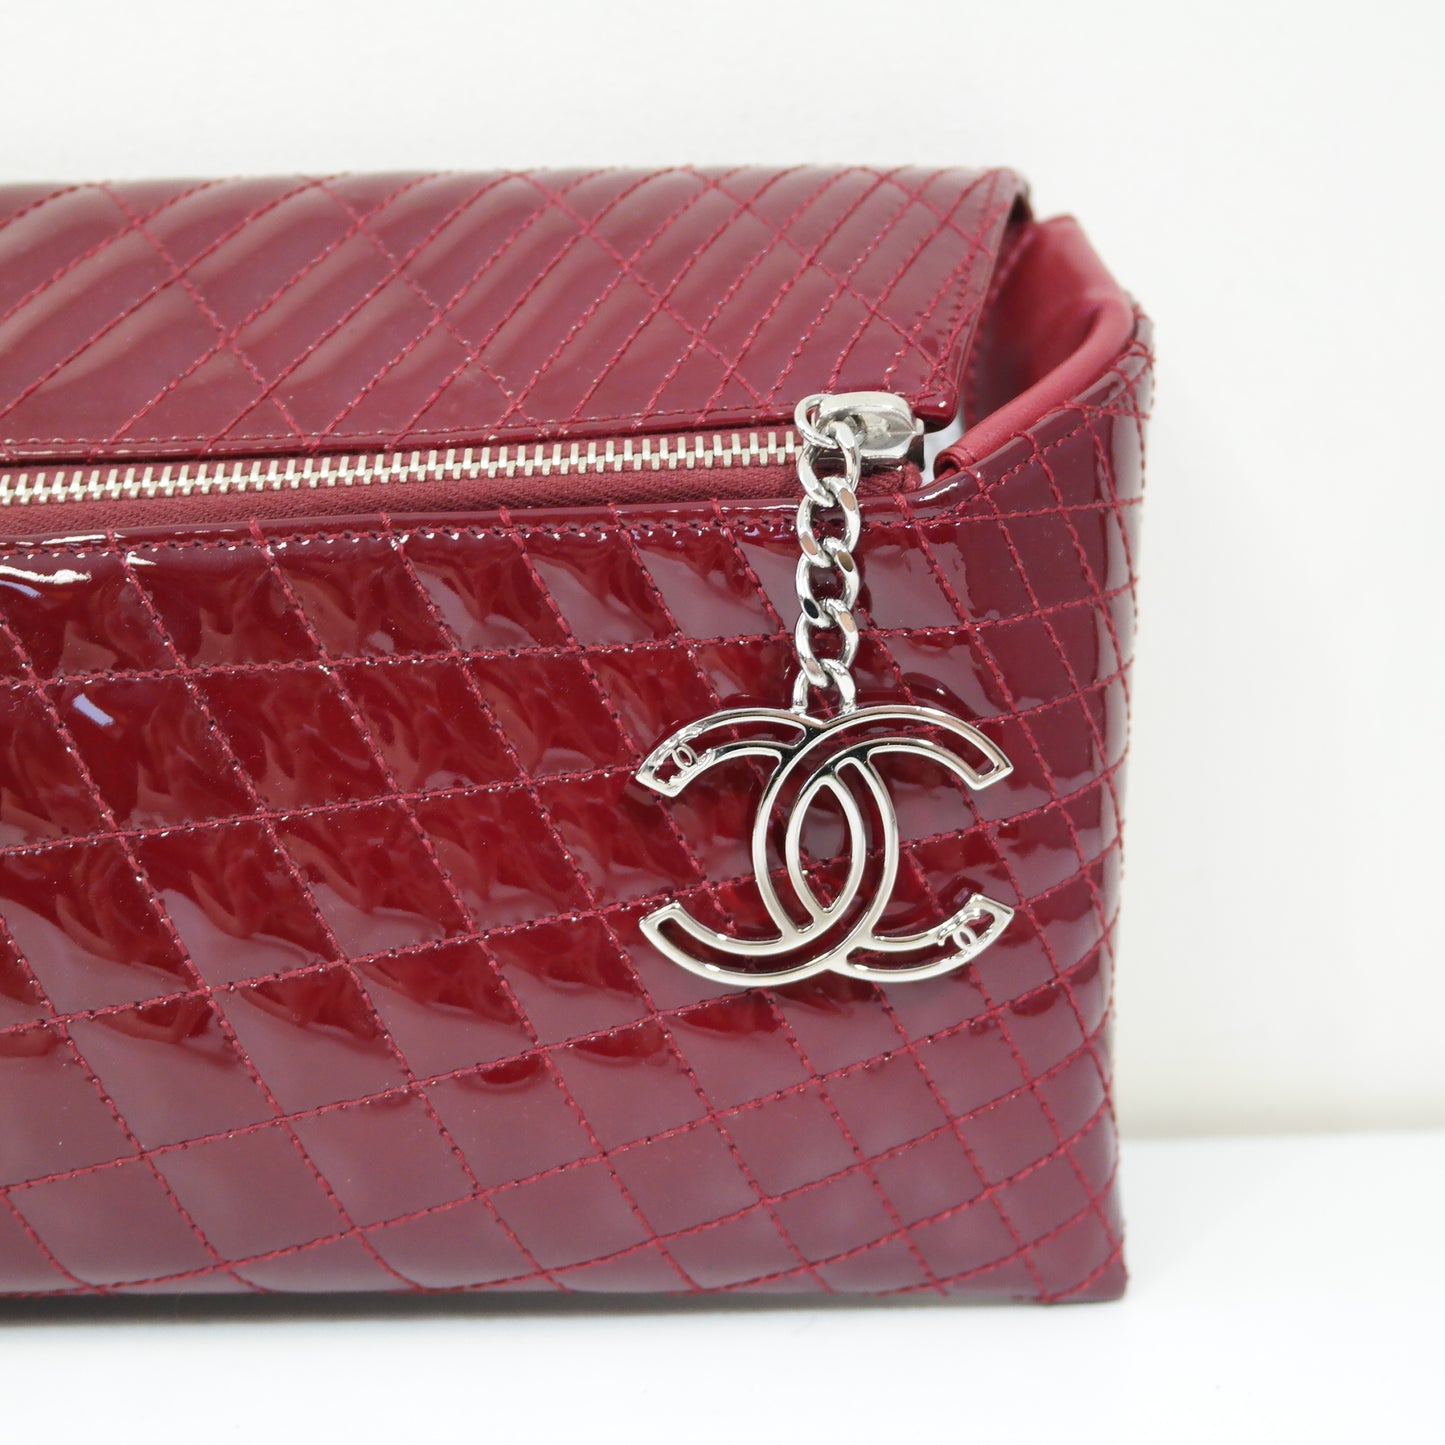 CHANEL Red Patent Calfskin Geometric Quilted Large Kaleidoscope Clutch Bag